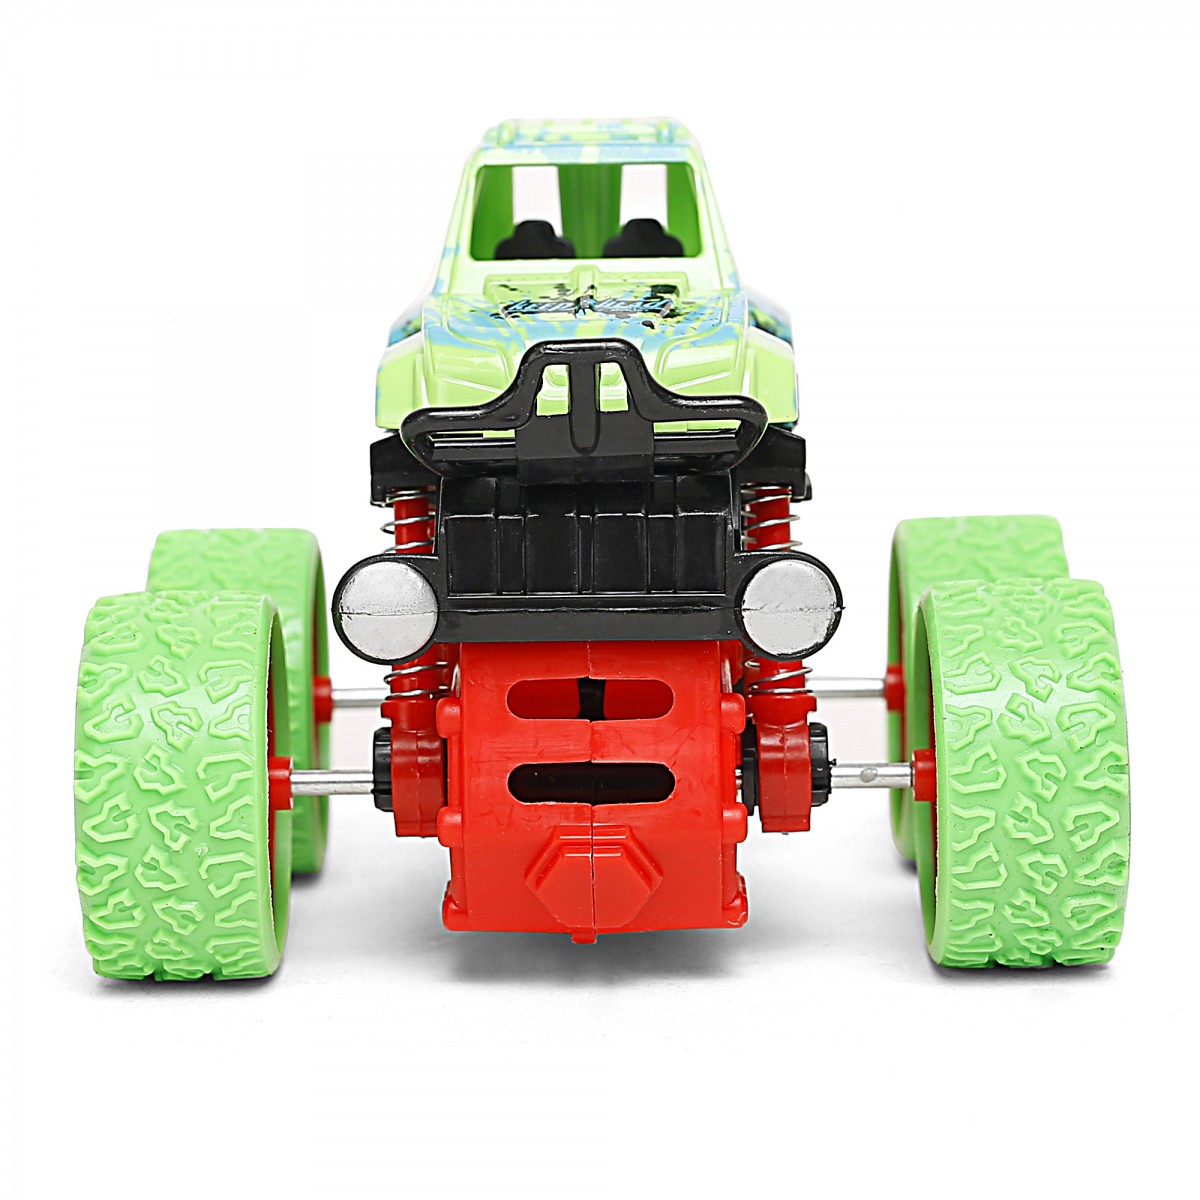 Ralleyz Friction Toy Car With Grip Wheels 4 Wheel Drive Force Amazing Kids Play Mini Toy Car Green 6Y+